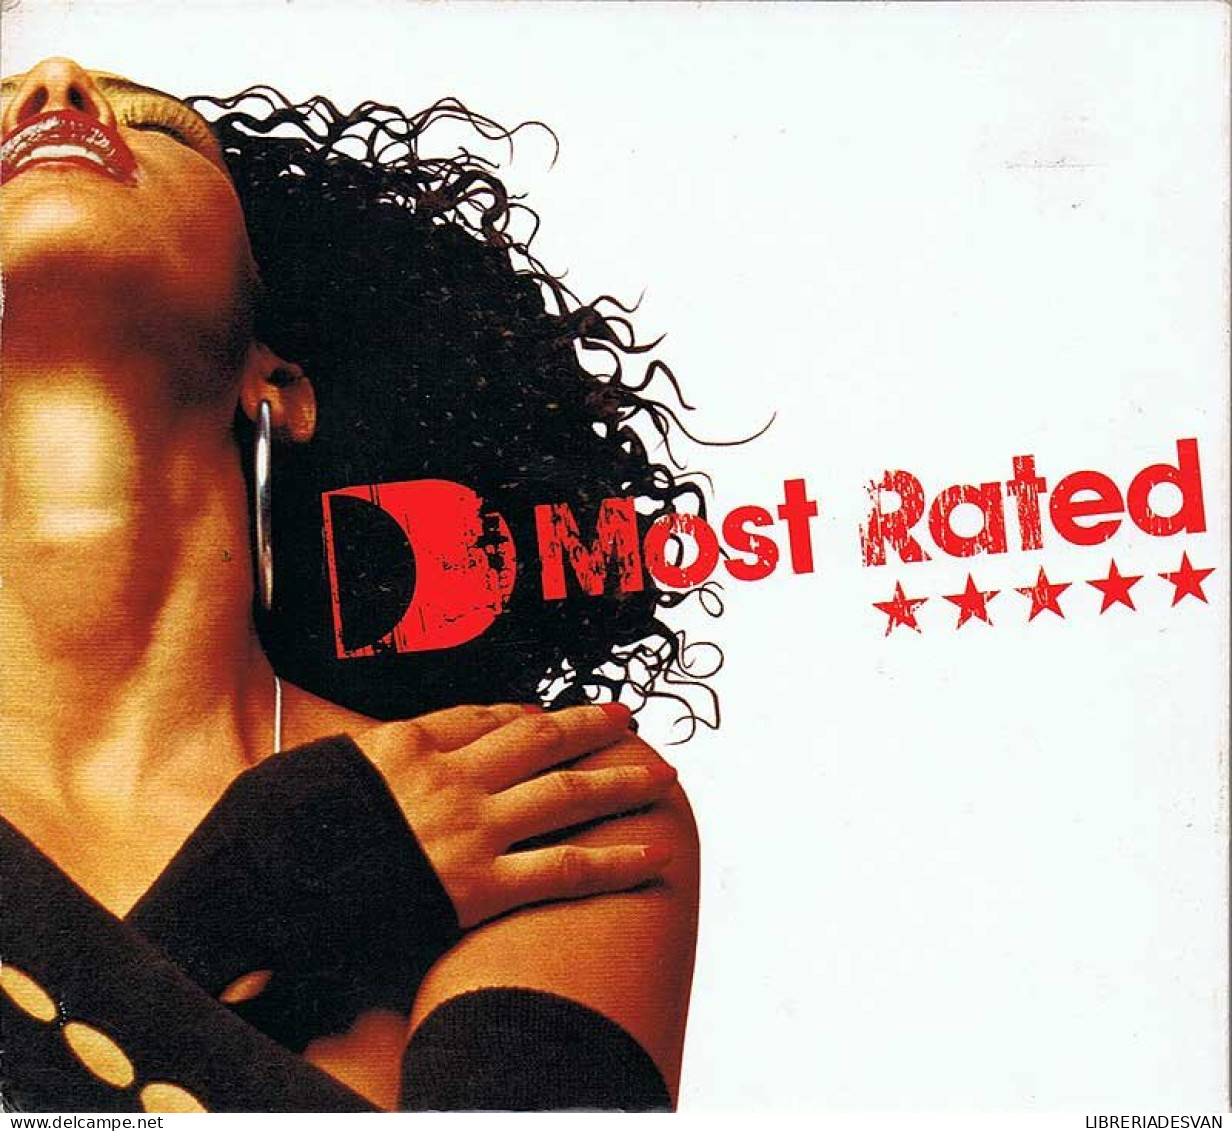 Defected Most Rated. 2 X CD + DVD - Dance, Techno & House